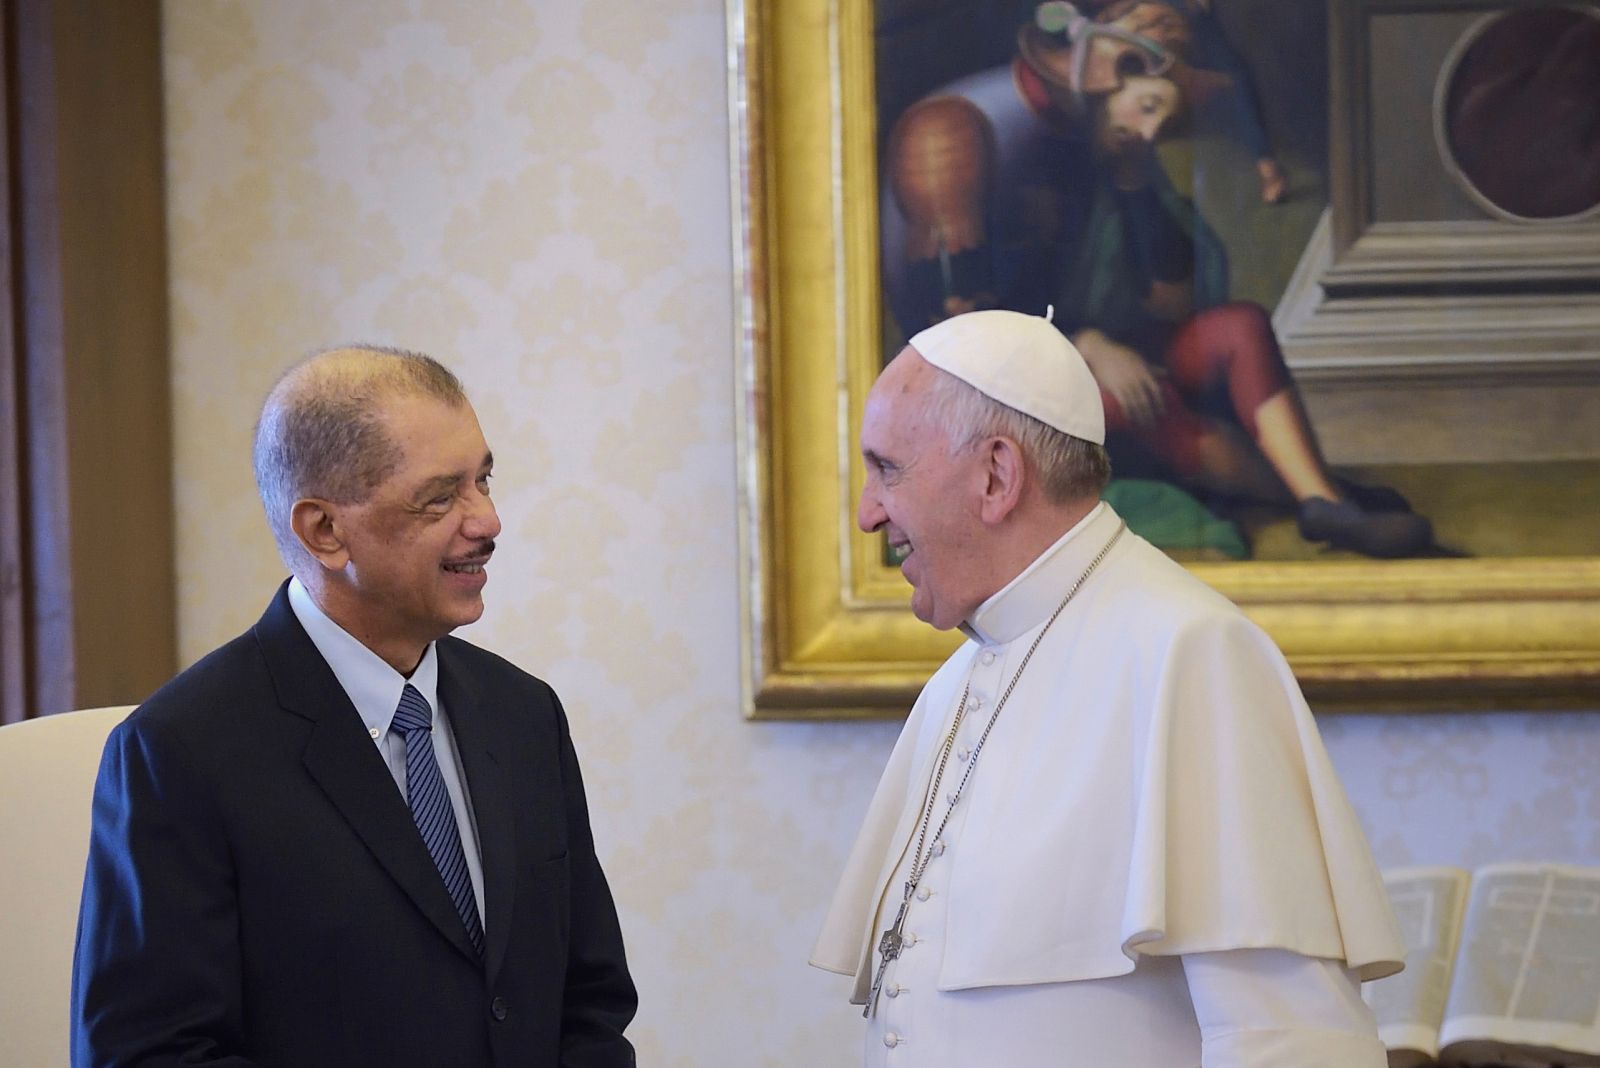 James Michel, then president of the Seychelles, with Pope Francis in Rome in 2015.